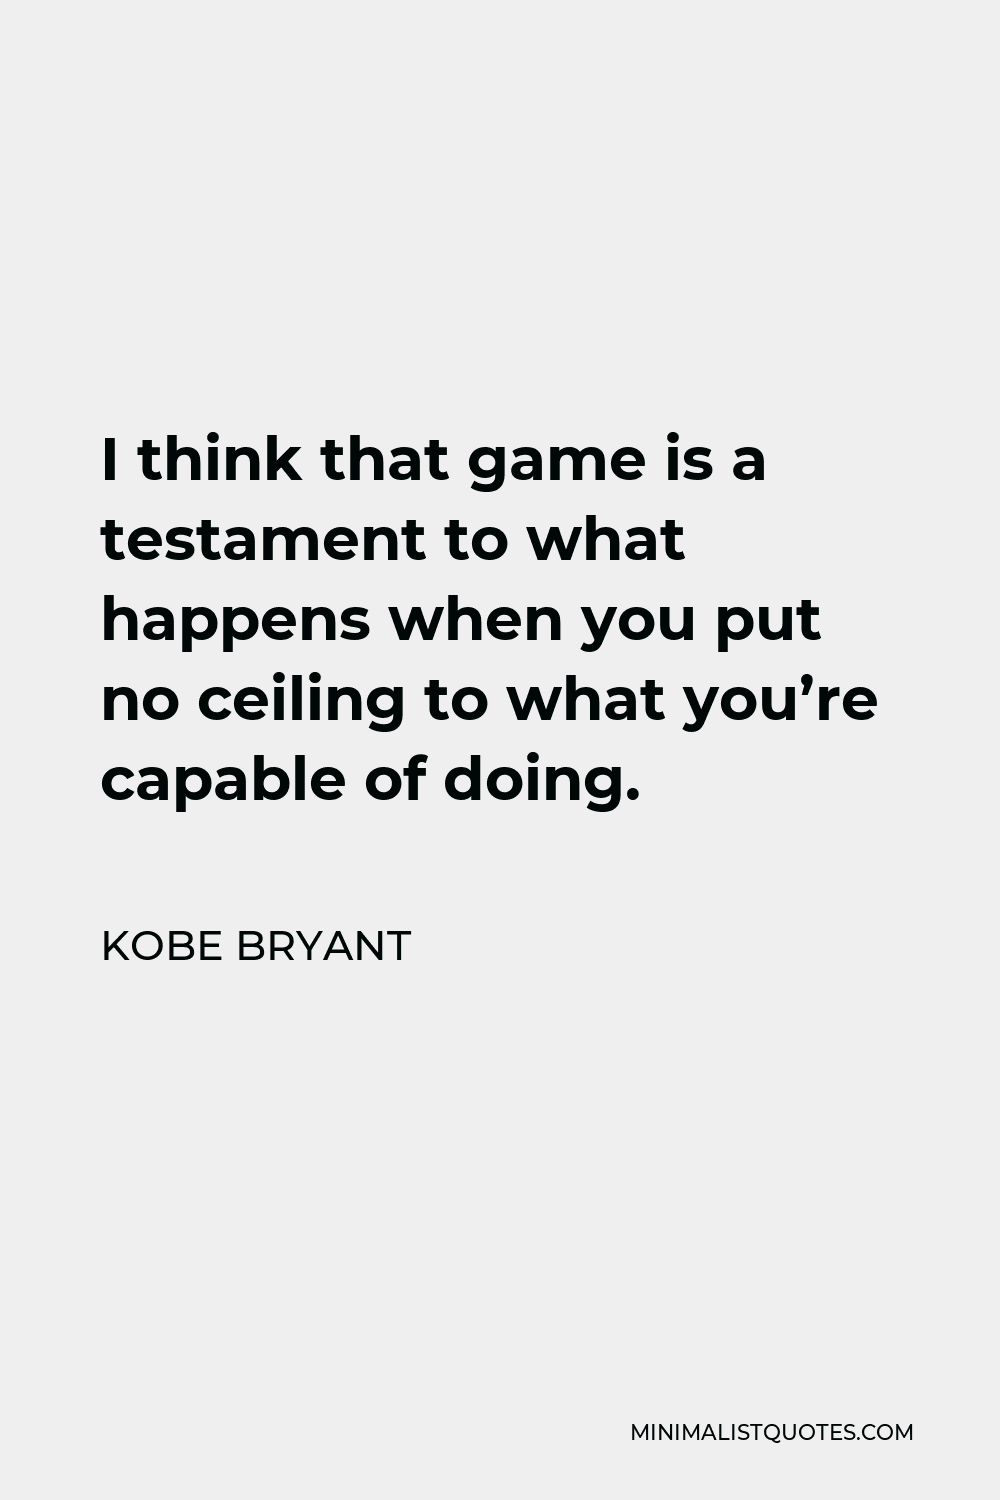 Kobe Bryant Quote - I think that game is a testament to what happens when you put no ceiling to what you’re capable of doing.